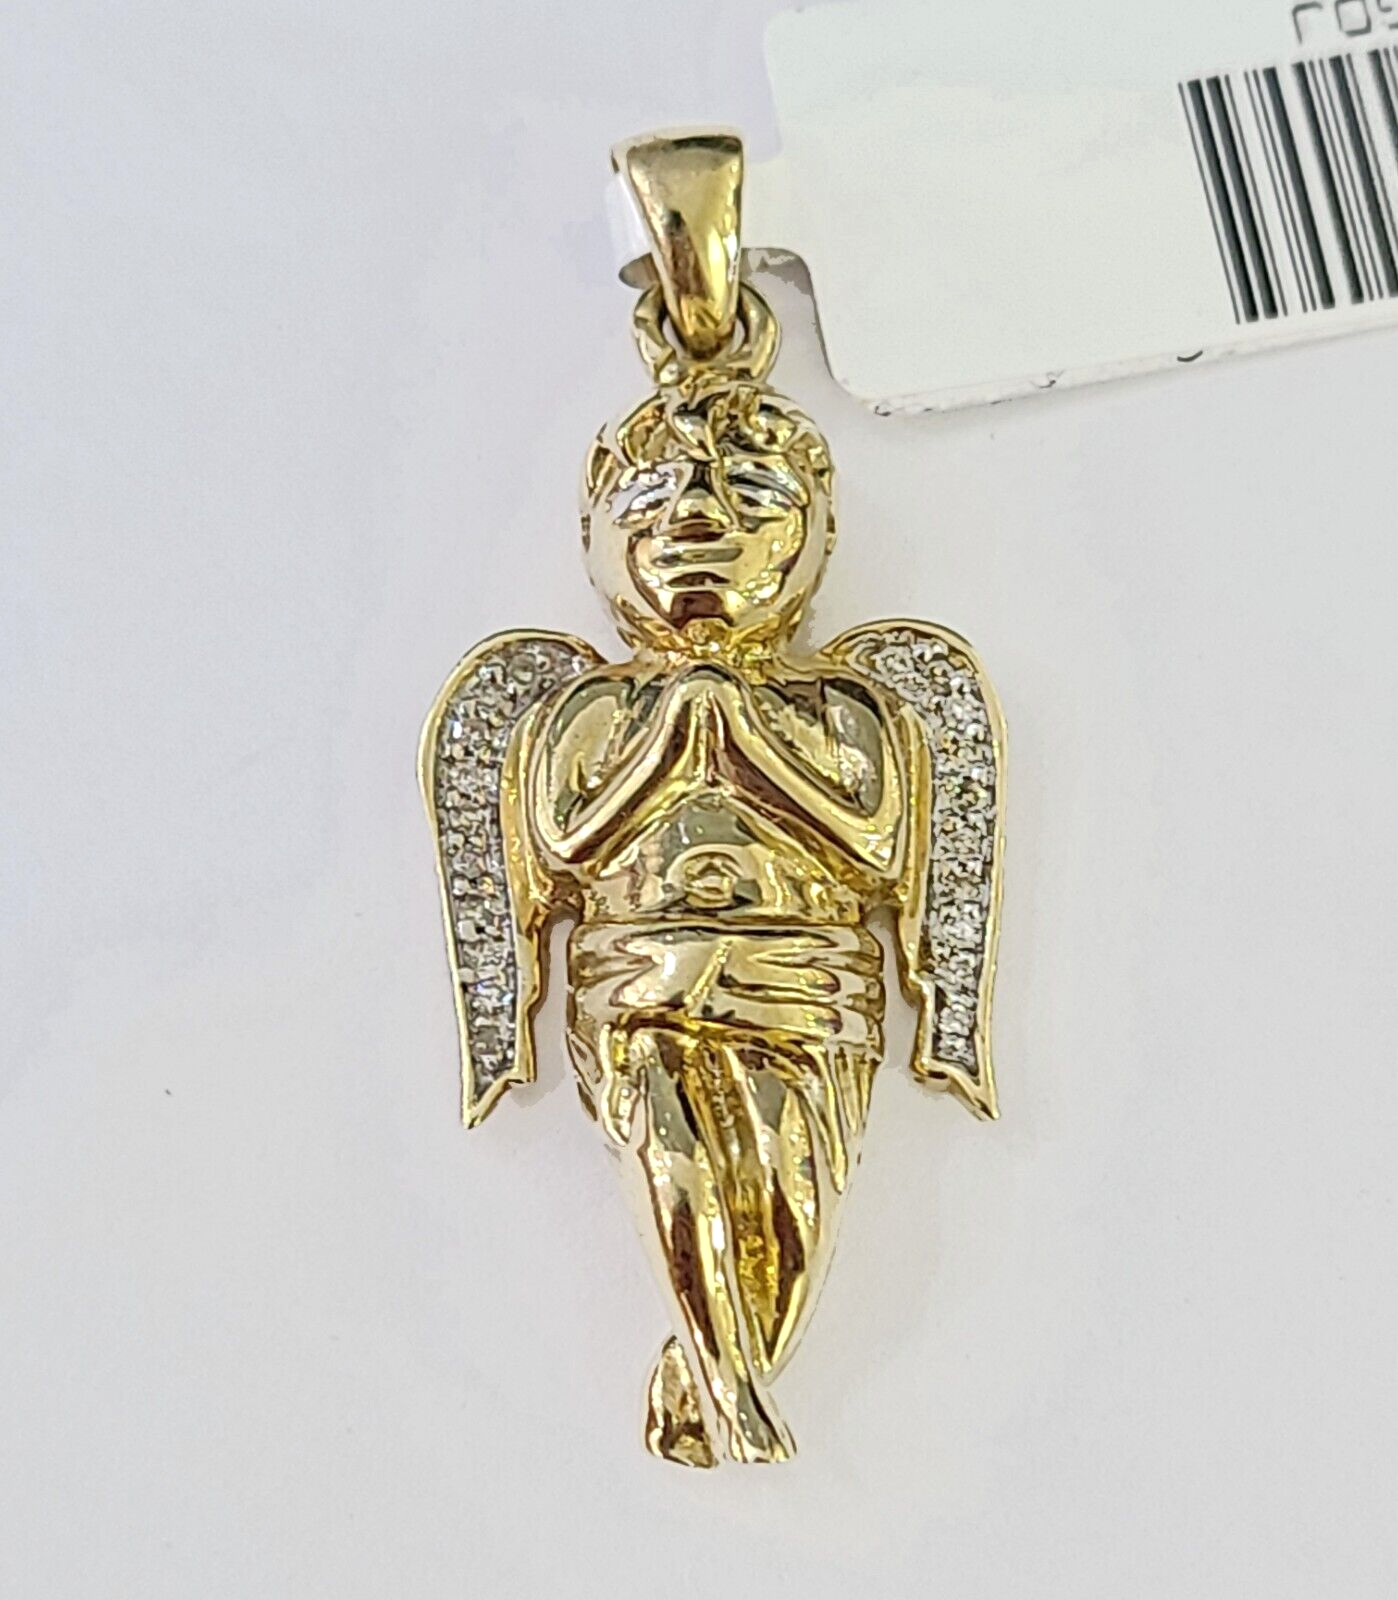 10K Real Praying Hands Charm/Pendant 0.07 CT Made with Yellow Gold and Diamonds